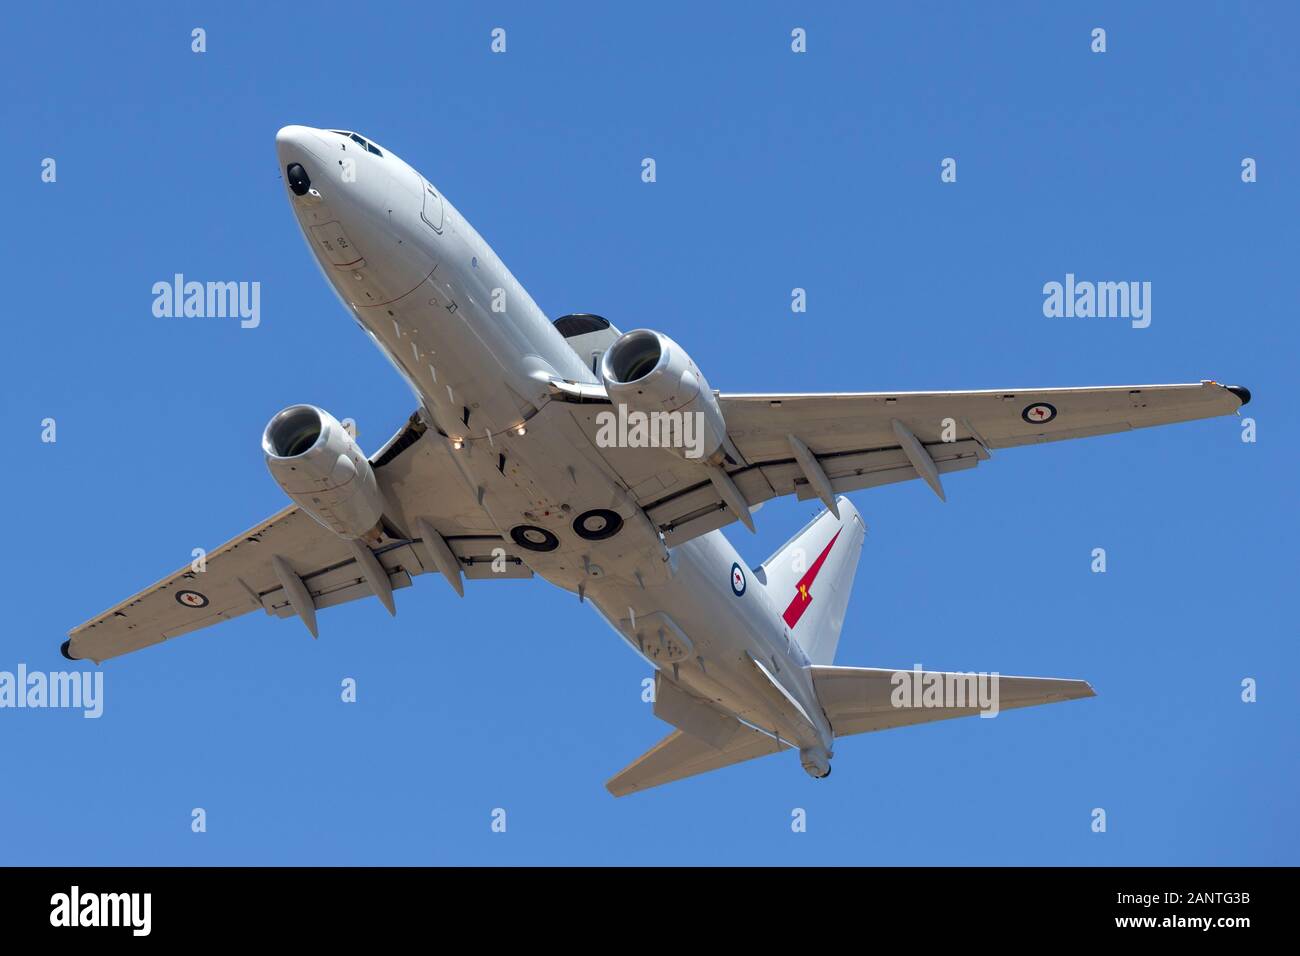 Royal Australian Air Force (RAAF) Boeing E-7A Wedgetail A30-004 AEW&C  twin-engine airborne early warning and control aircraft Stock Photo - Alamy